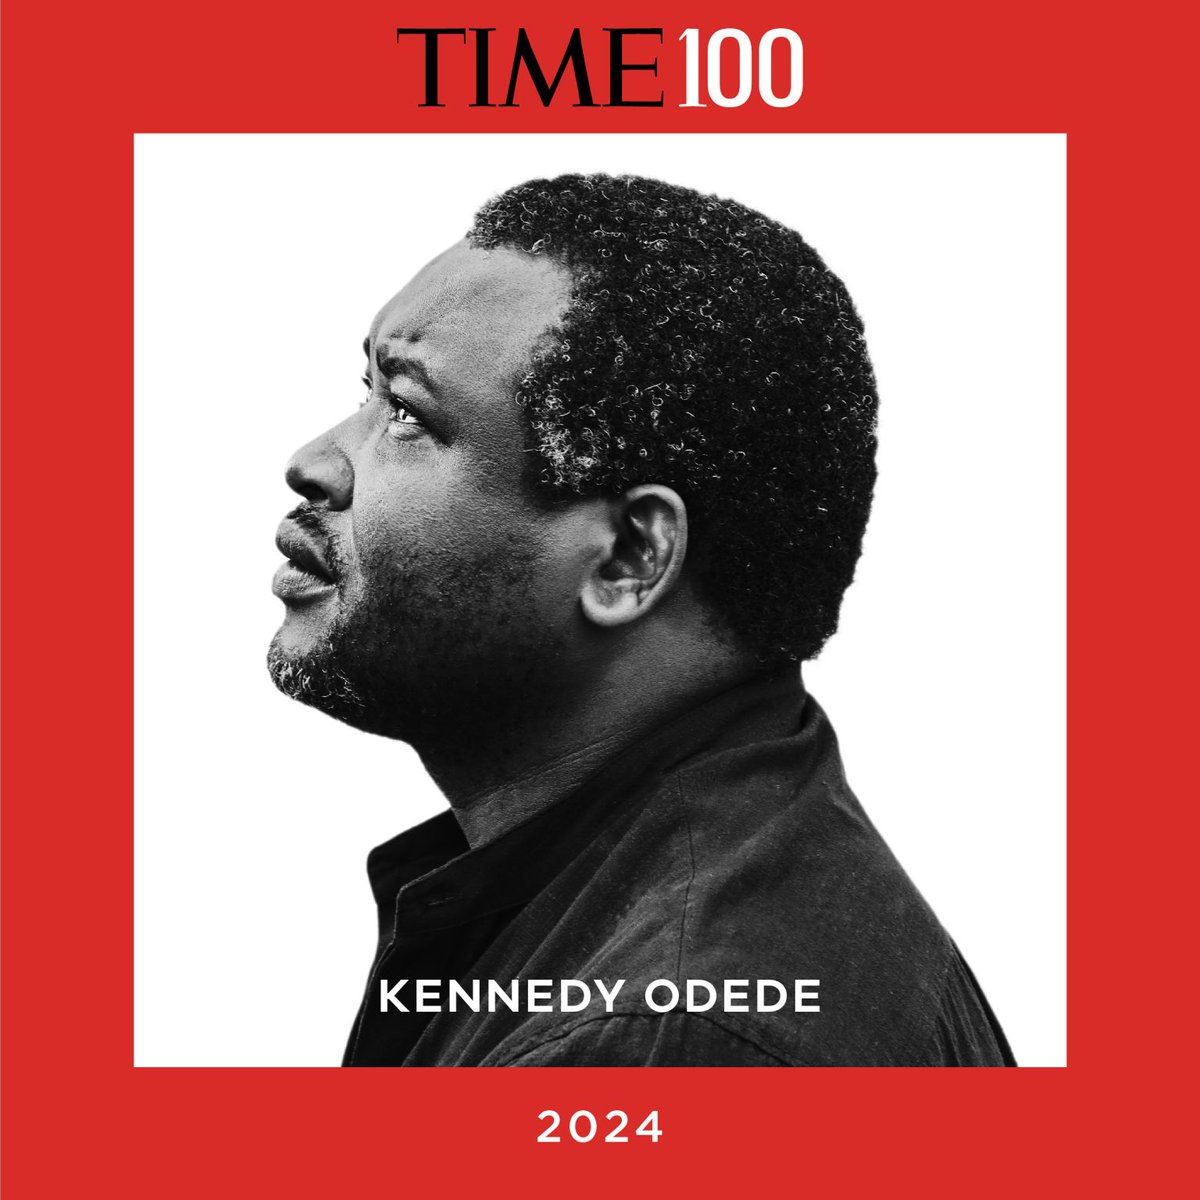 'There is no challenge he will not take on. He is an unstoppable force for justice.' Congratulations to @KennedyOdede '12, named one of @TIME's 100 Most Influential People of 2024. bit.ly/4b0mIzX 📸: Eric Laurits